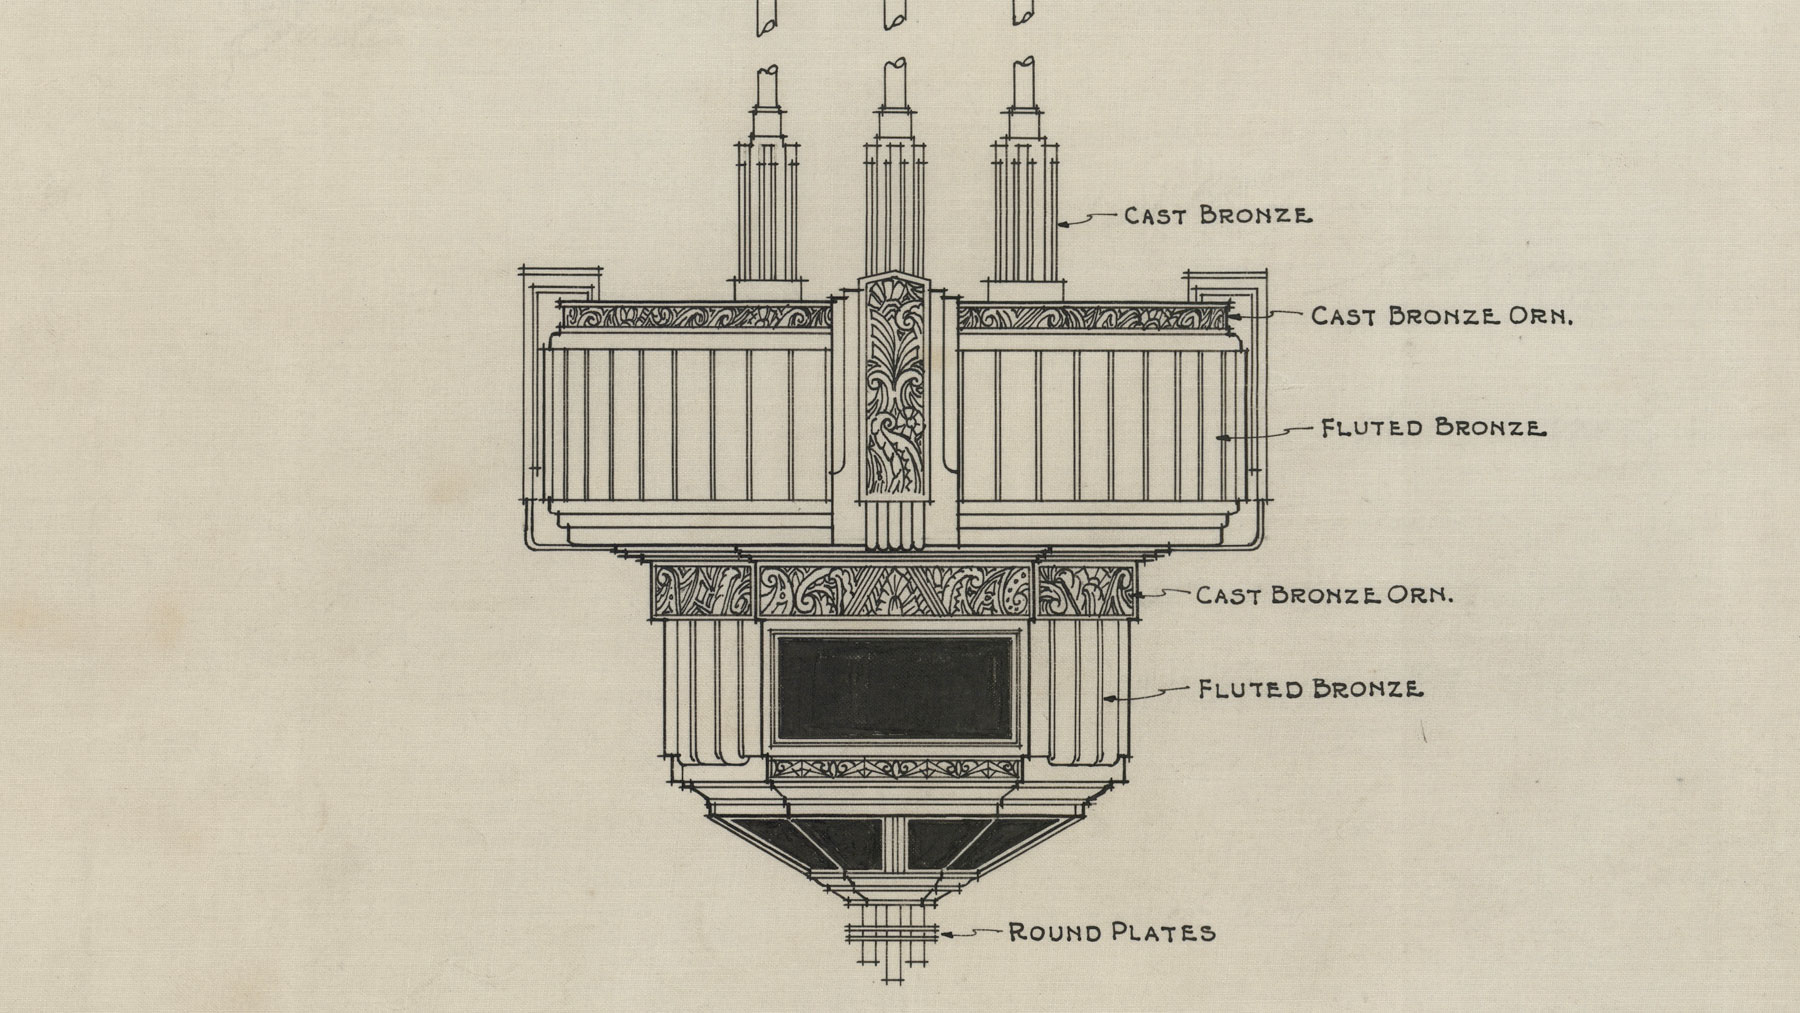 The Dominion Public Building: The Architectural Drawings - Details